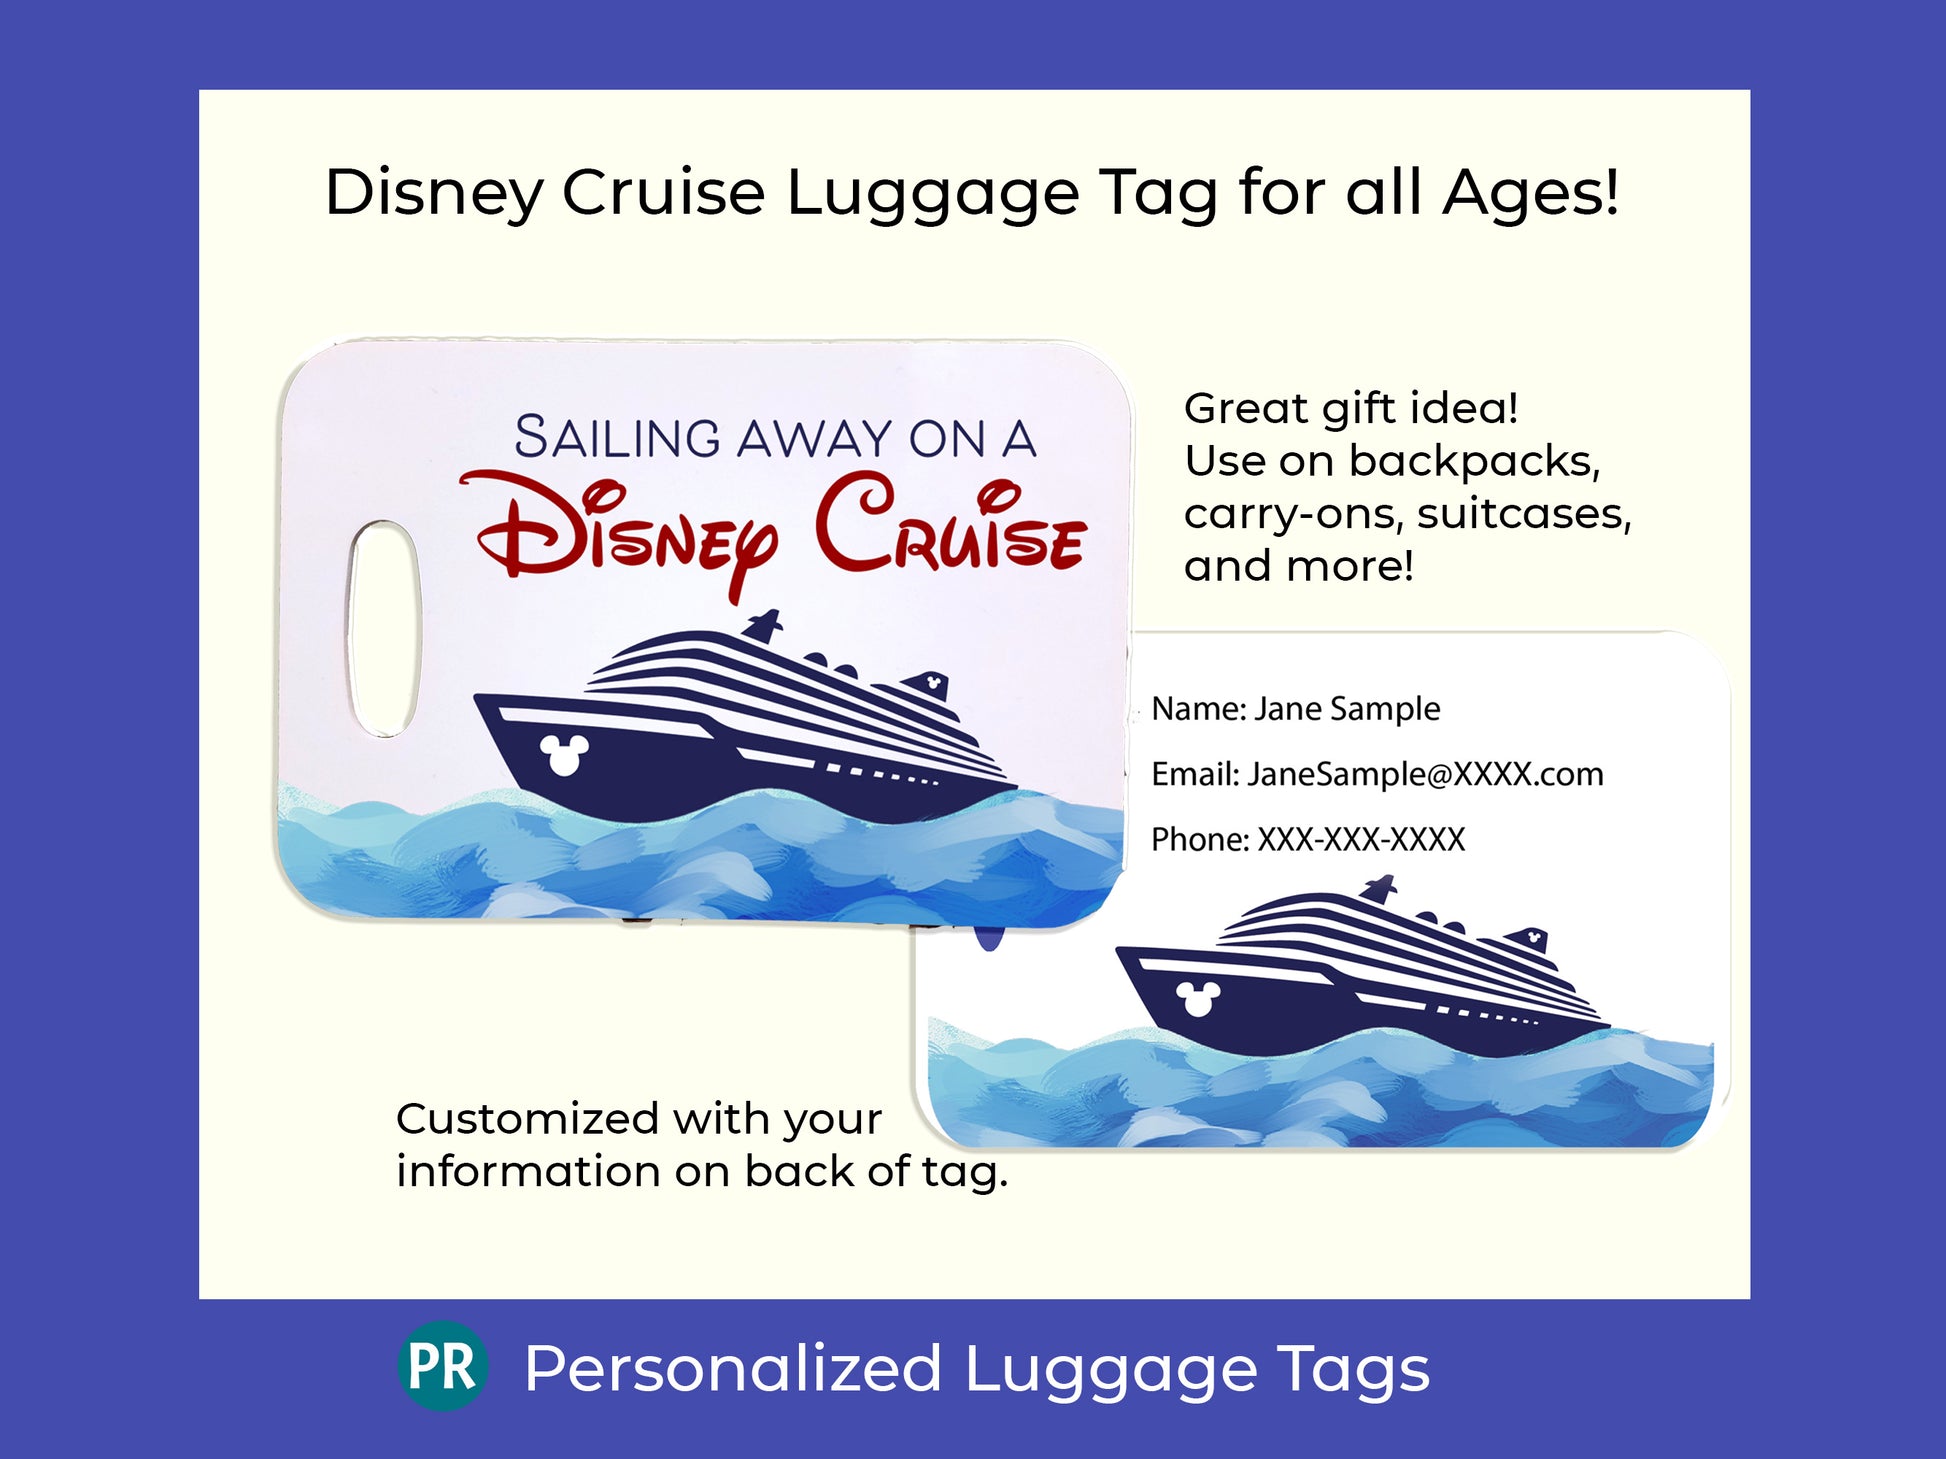 Personalized luggage tag with a Disney Cruise ship theme. The back of the luggage tag has your information Name, address and phone number. Great gift for all!